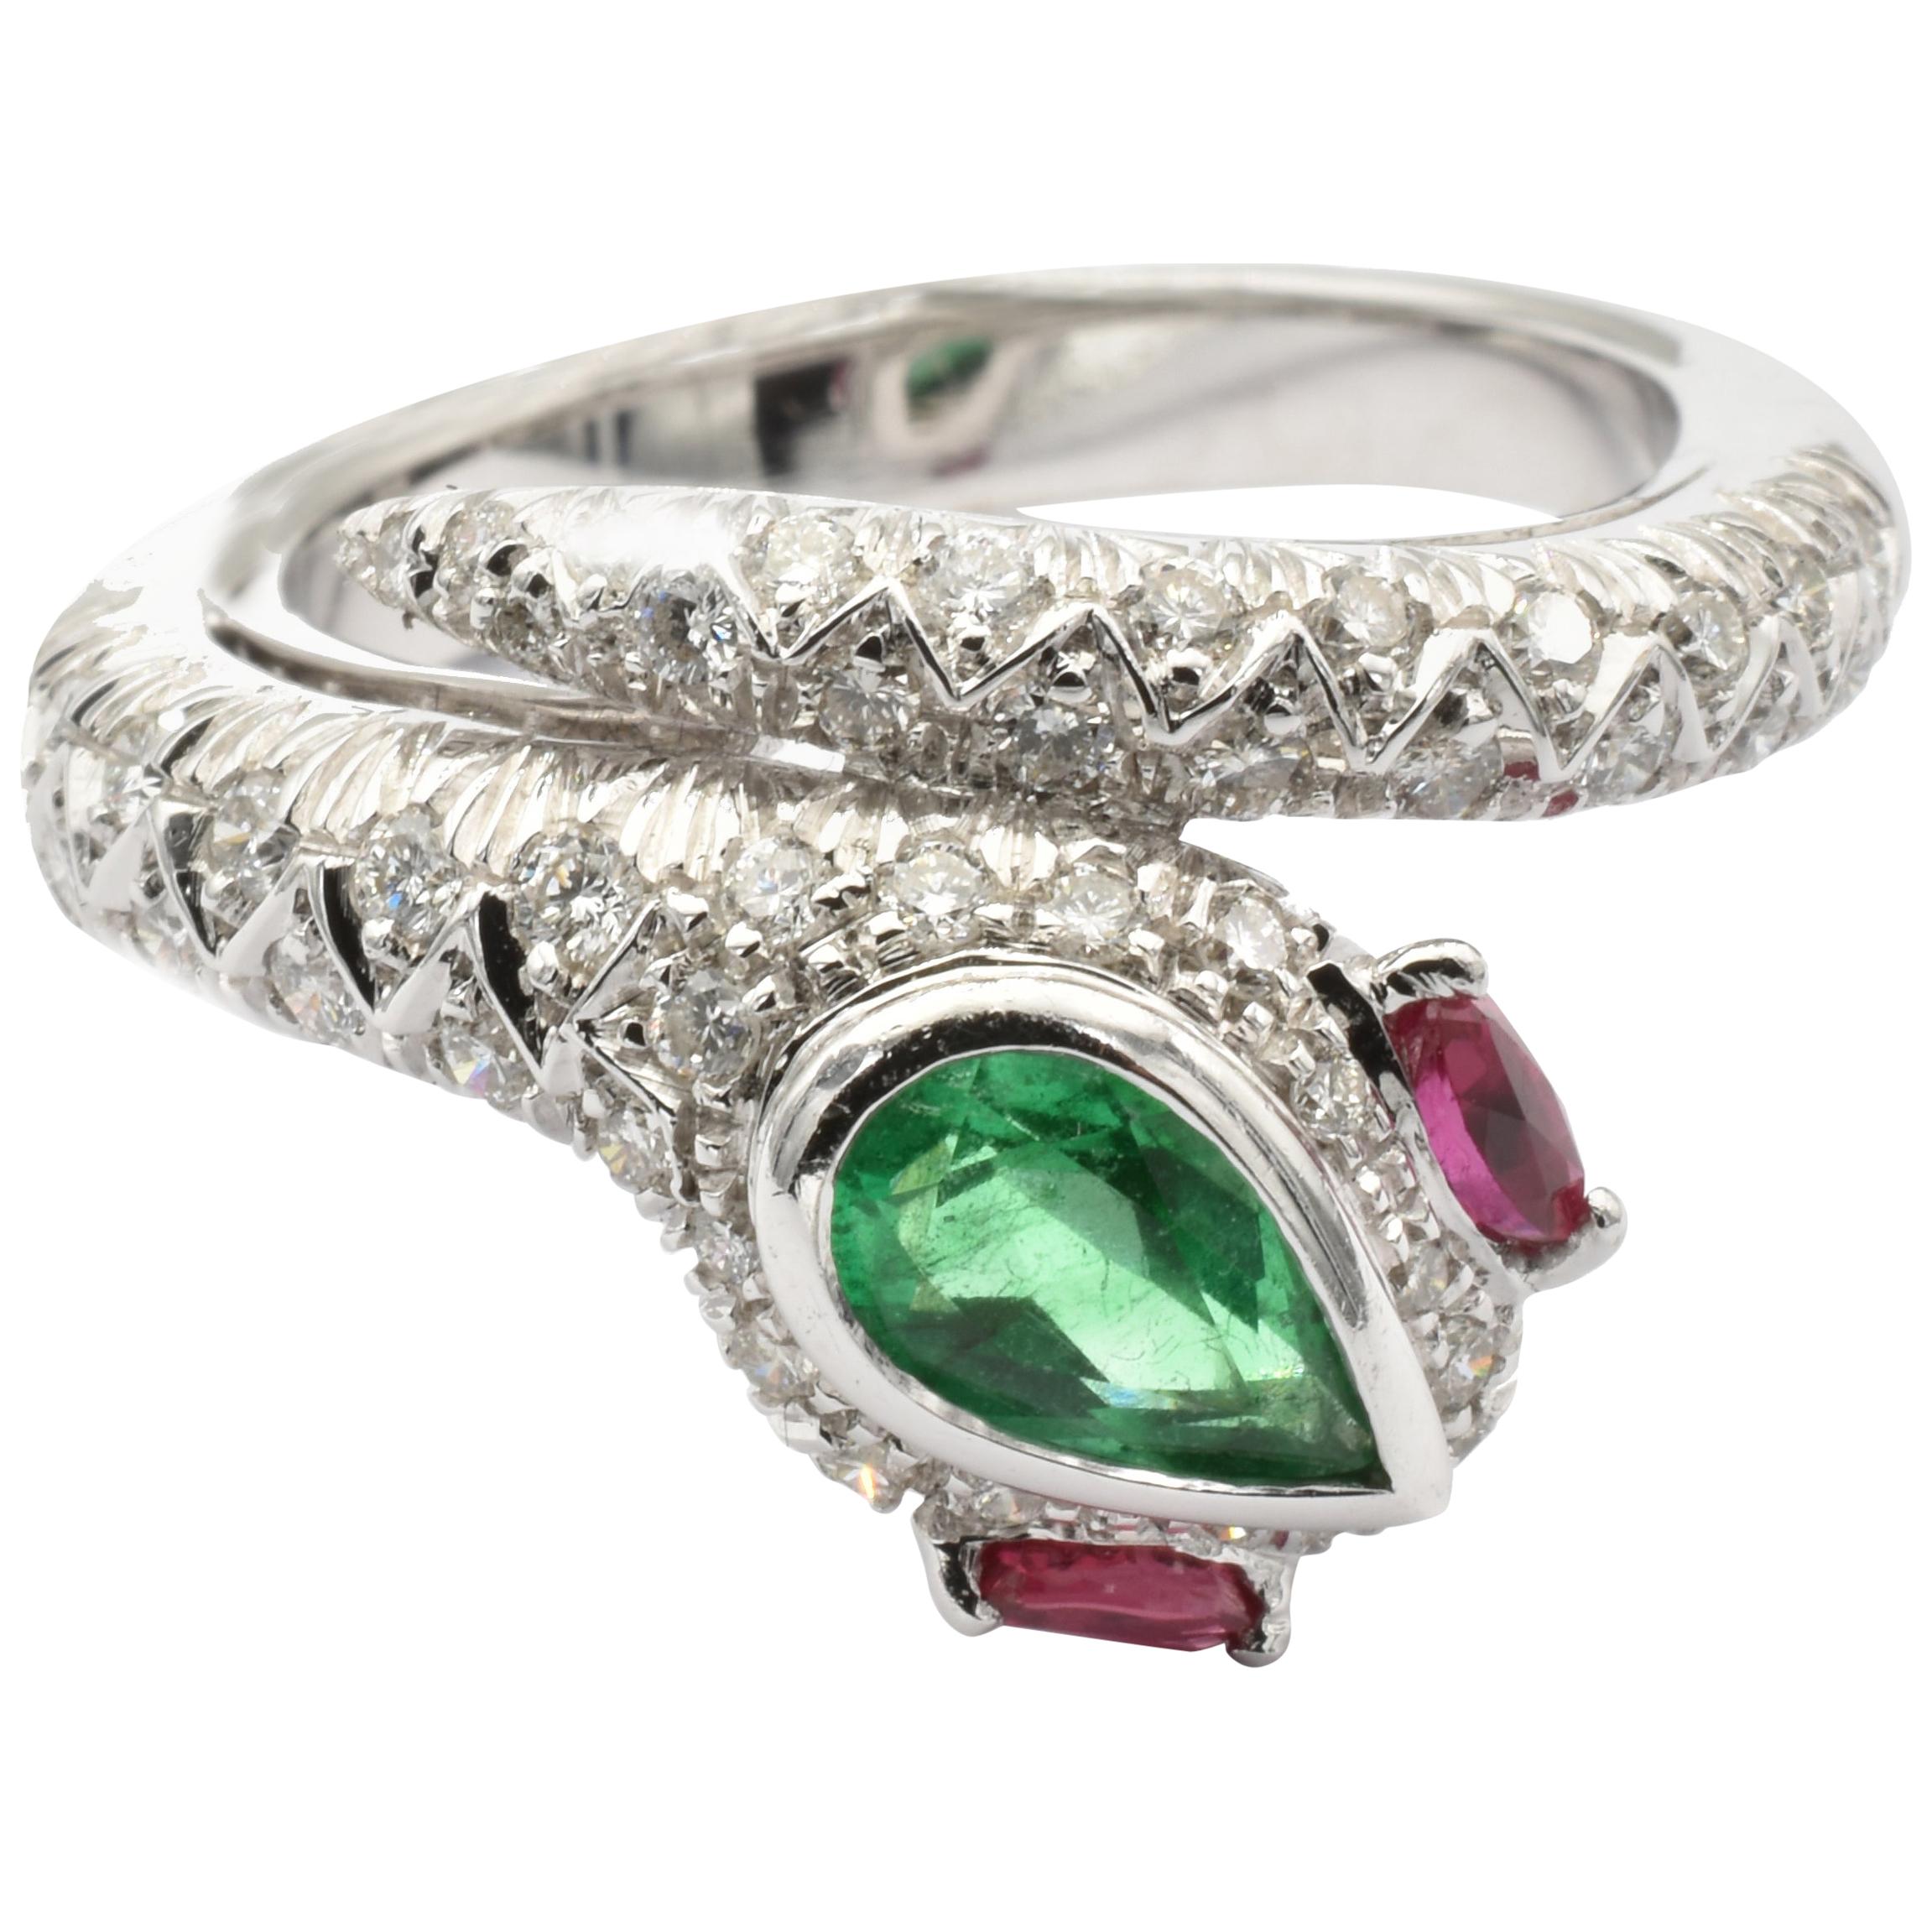 Pear Emerald, Rubies and Diamonds White Gold Snake Ring Made in Italy